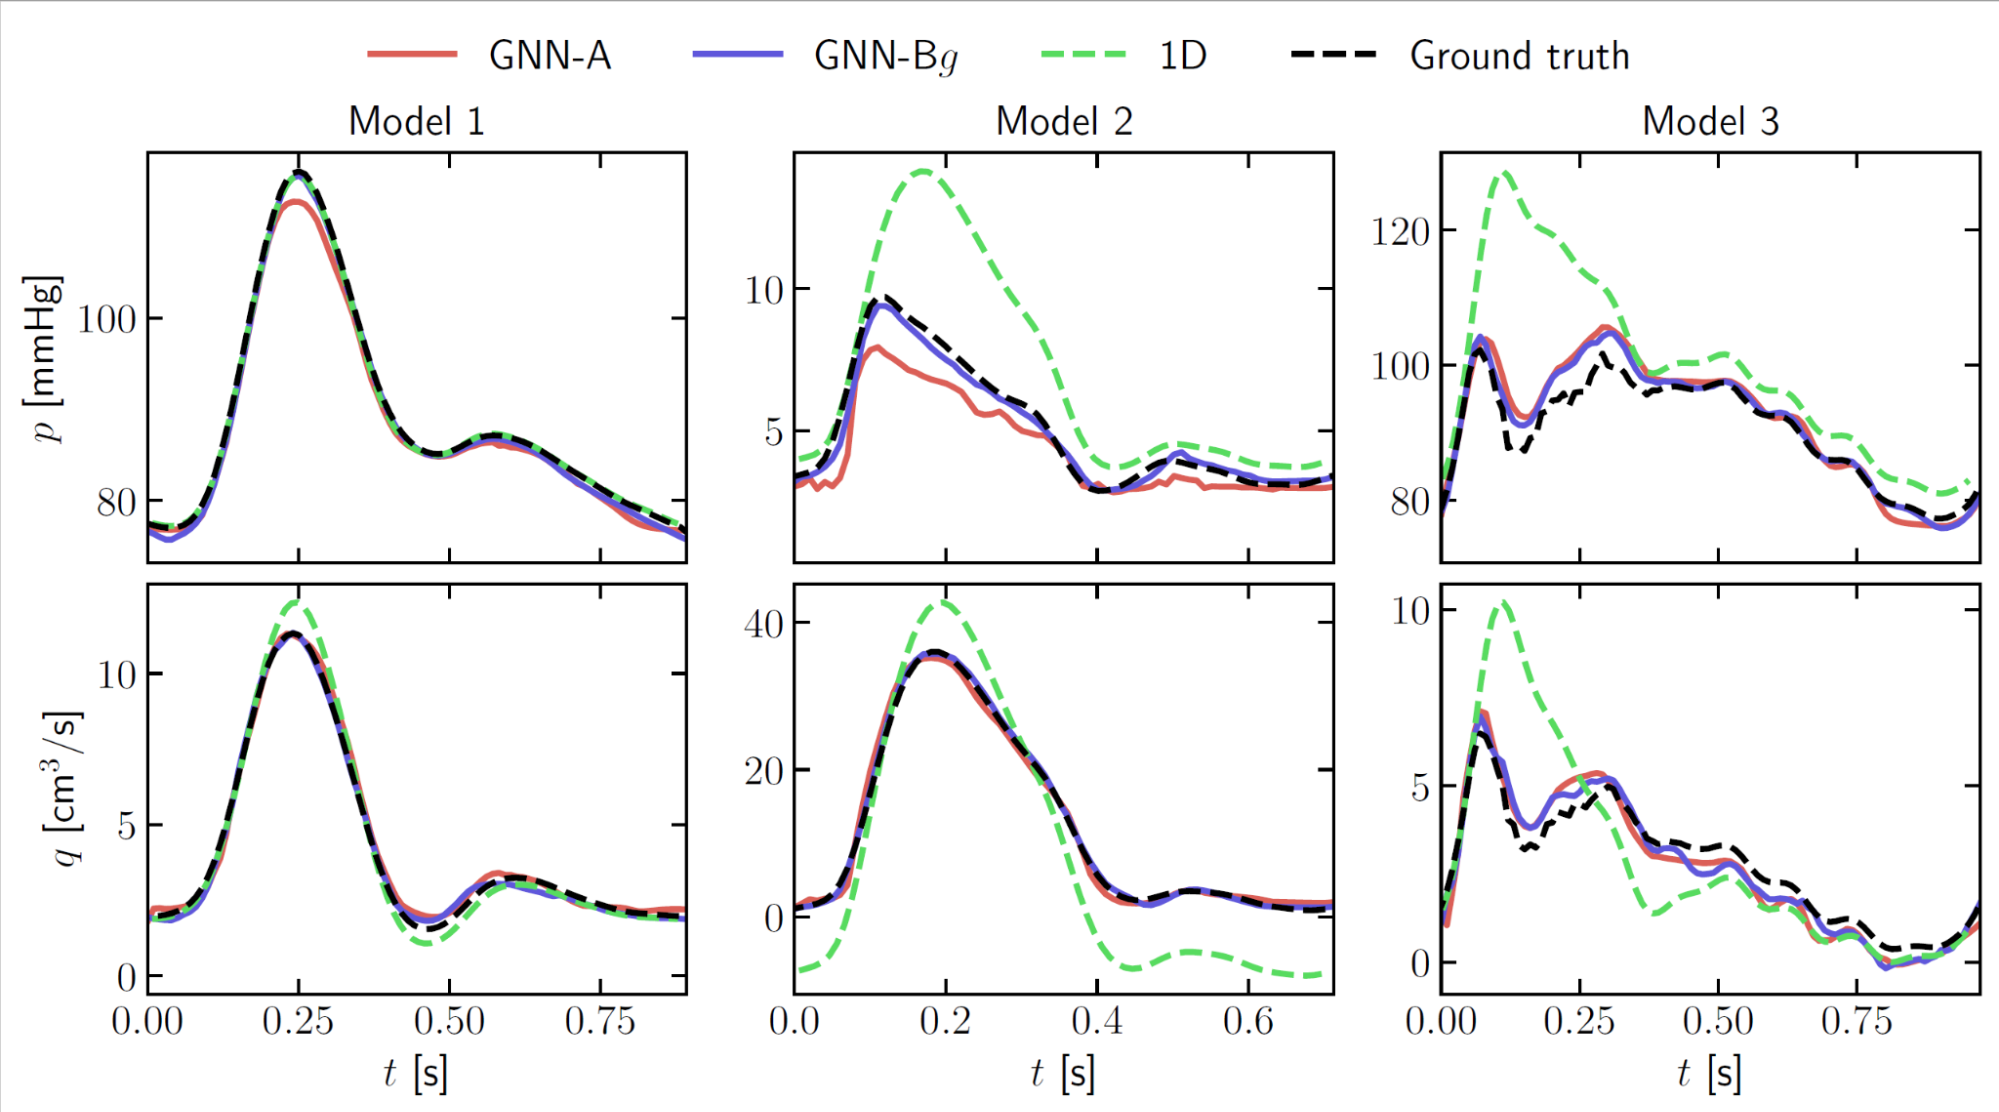 The figure plots the pressure and flow rate predicted by two of the GNN models, the 1D physics-based ROM, and how they compare to the ground truth for a complex model with stenosis.